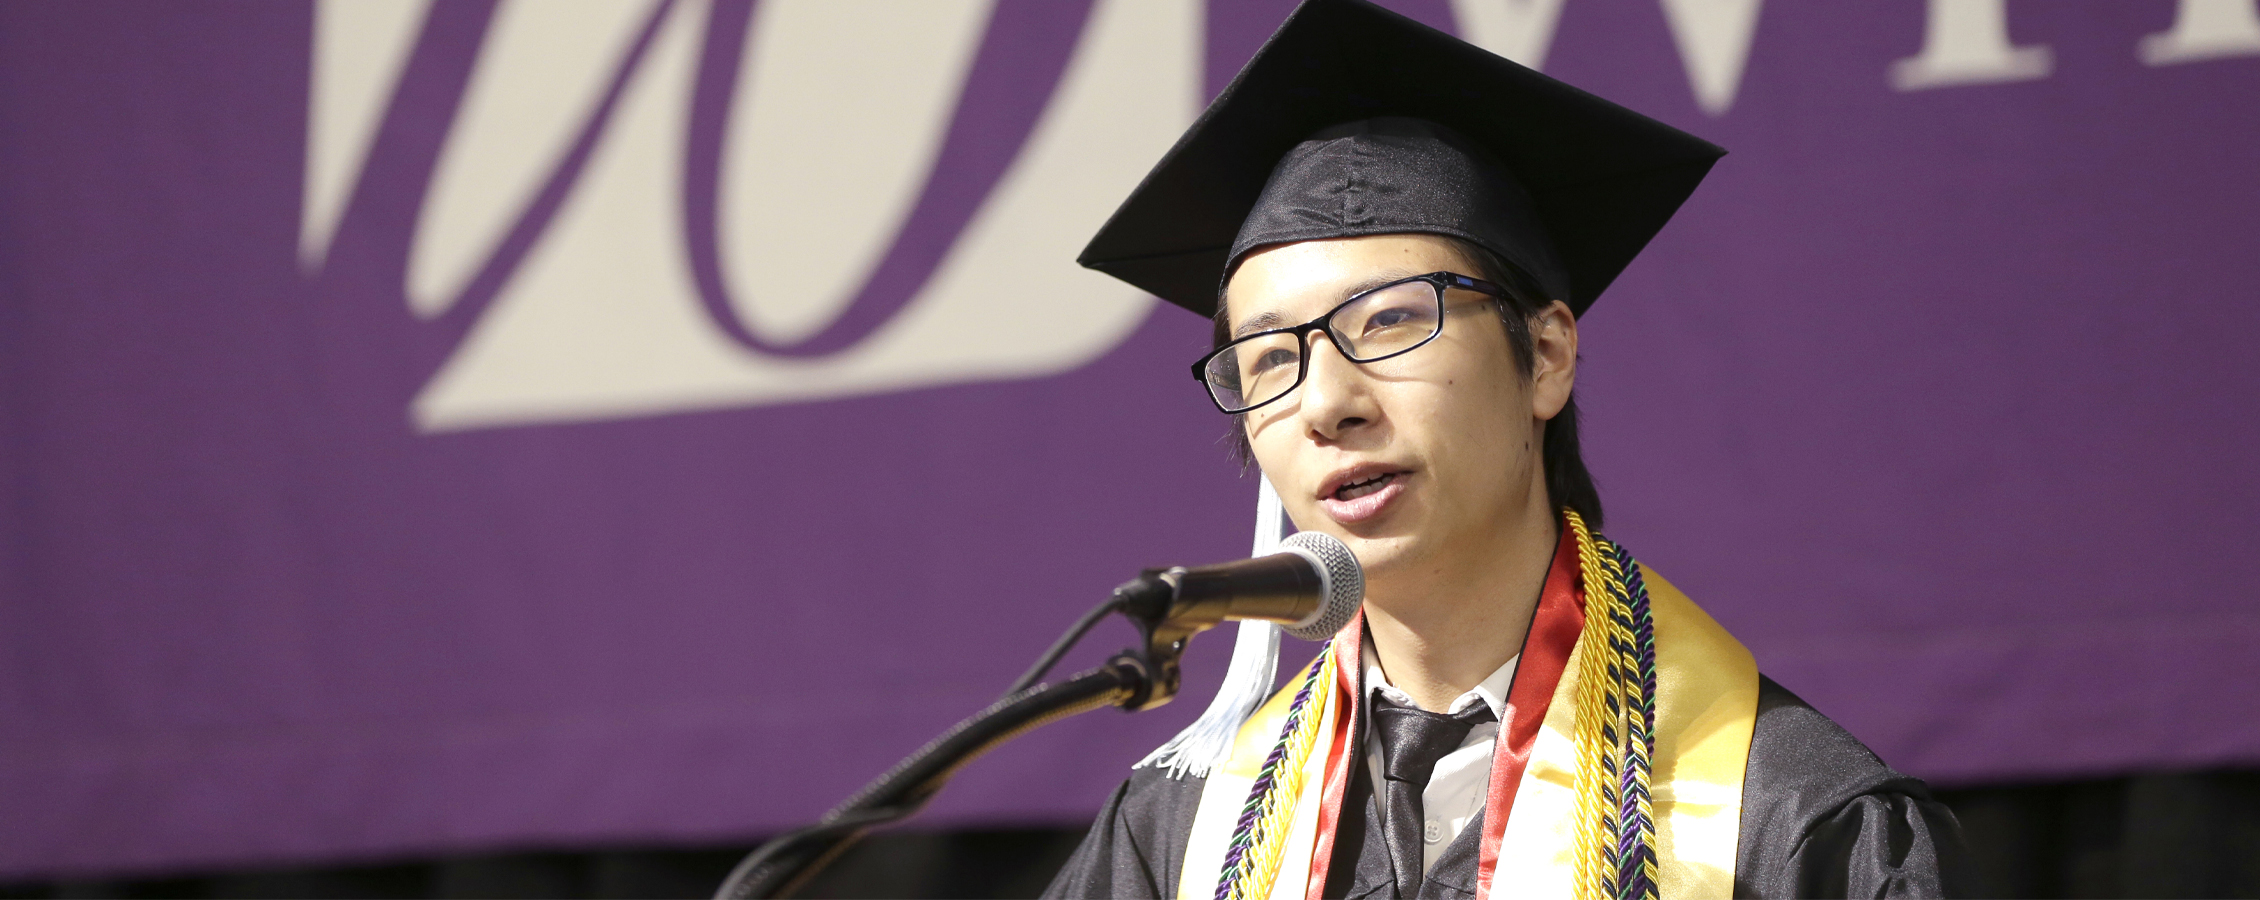 An international student from China gives a speech at graduation.